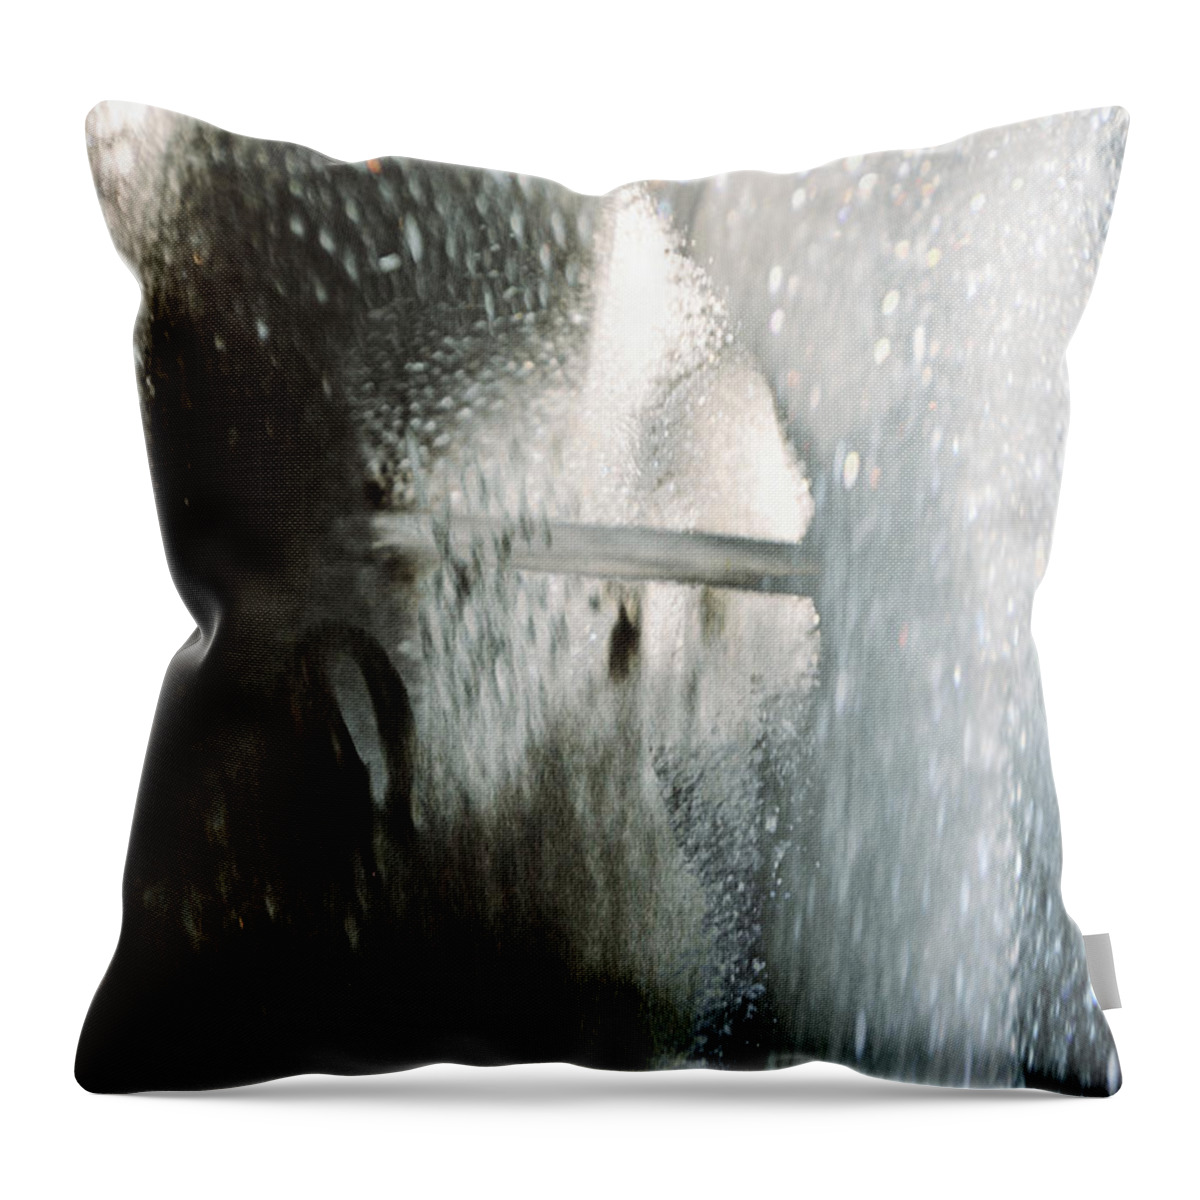 Abstract Throw Pillow featuring the photograph Rain by Gerlinde Keating - Galleria GK Keating Associates Inc